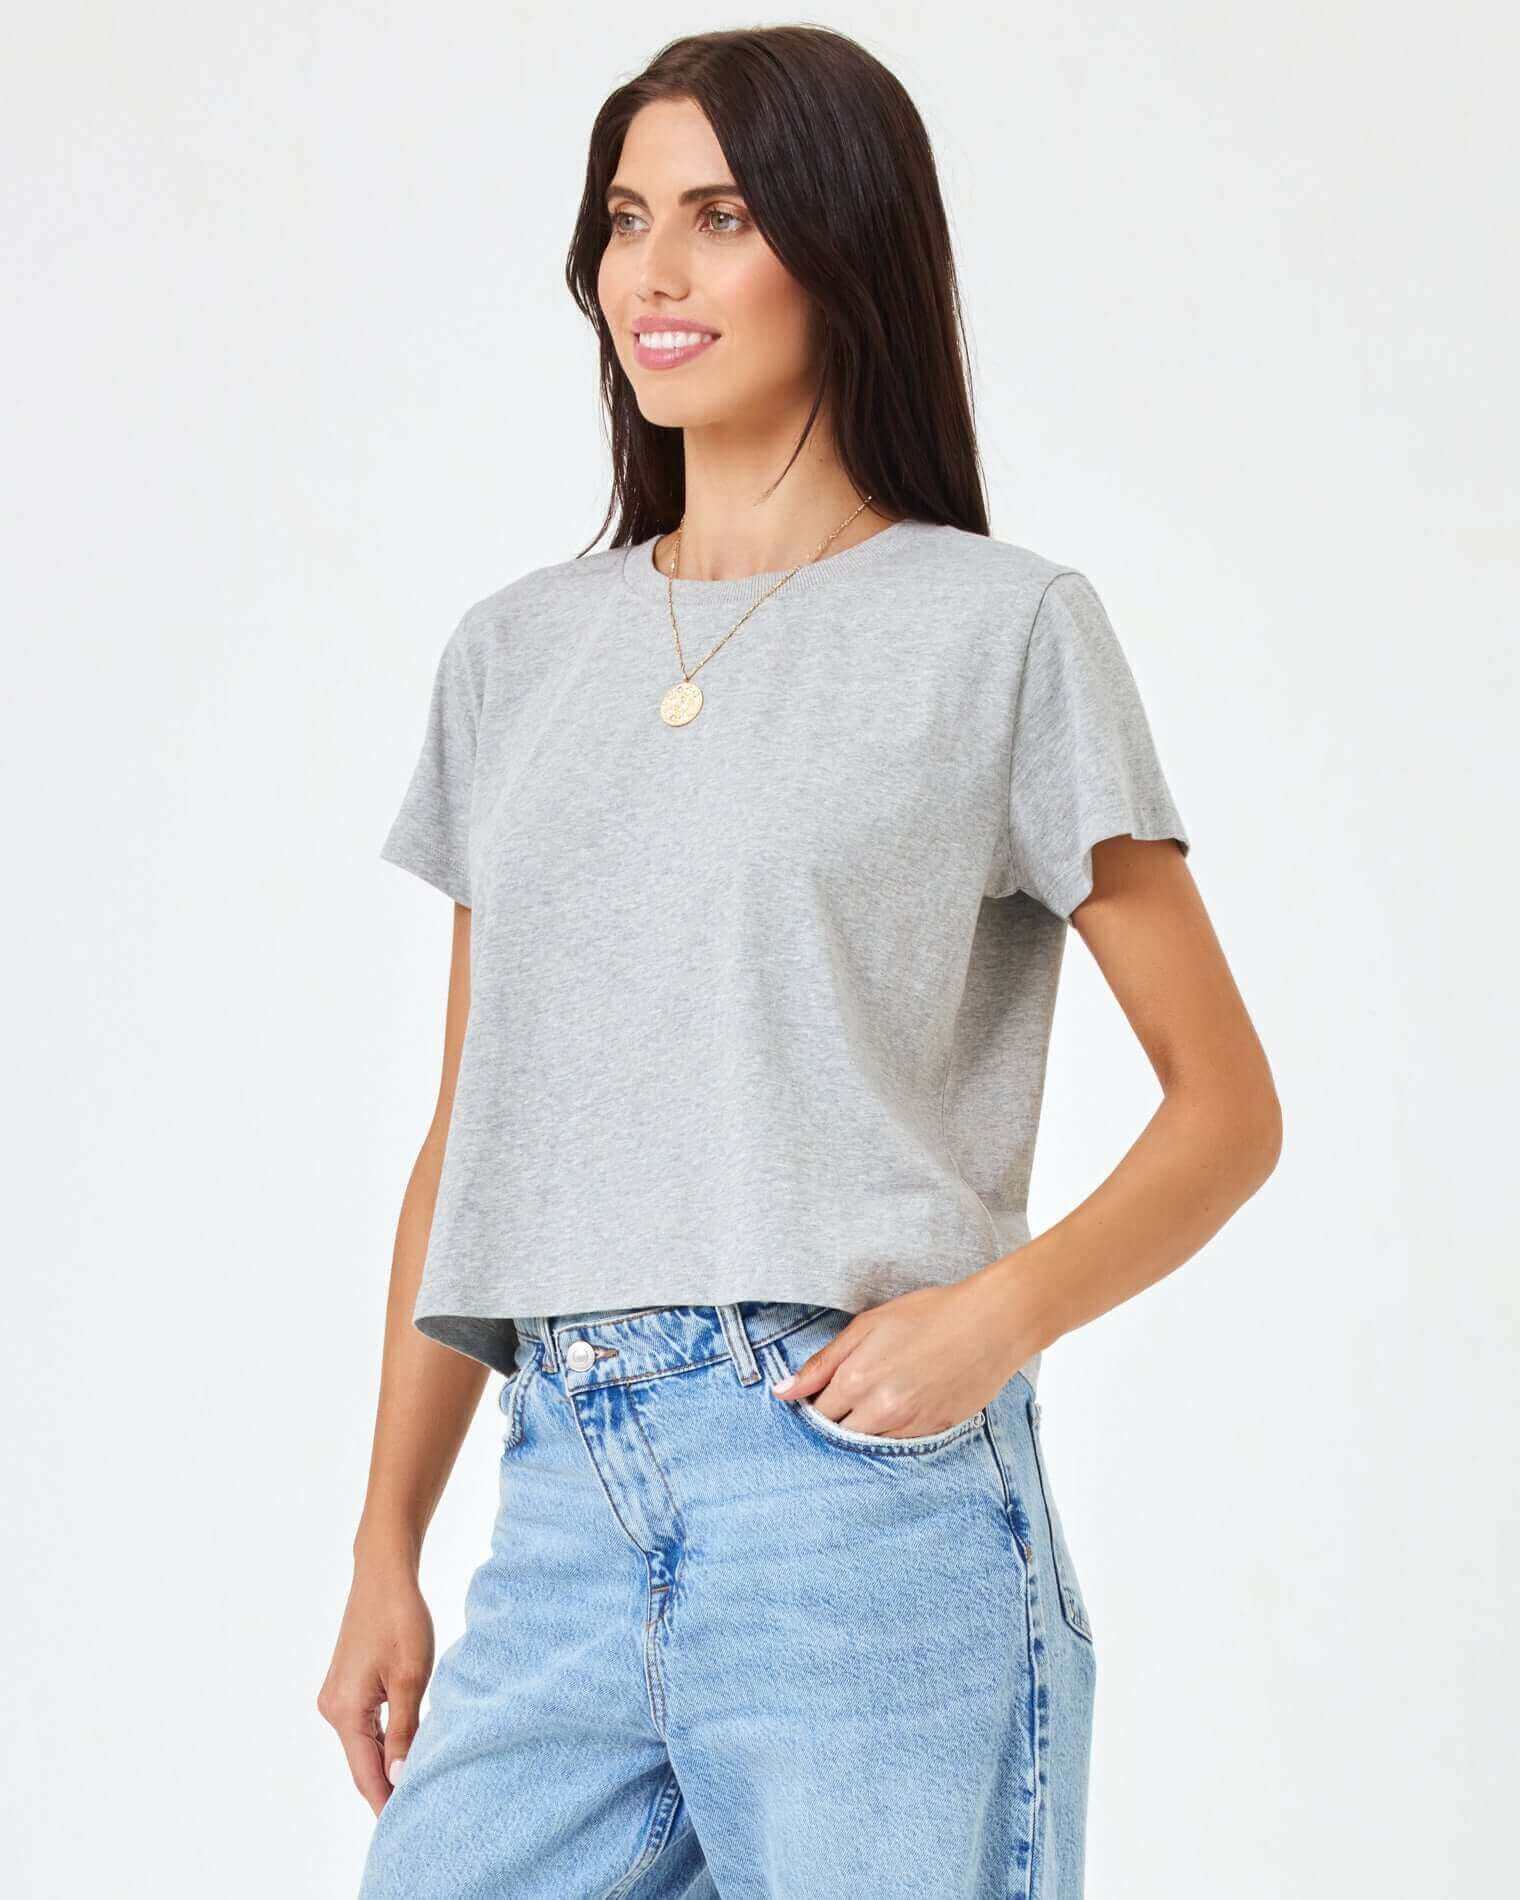 LSpace All Day Top in Heather Grey - Side